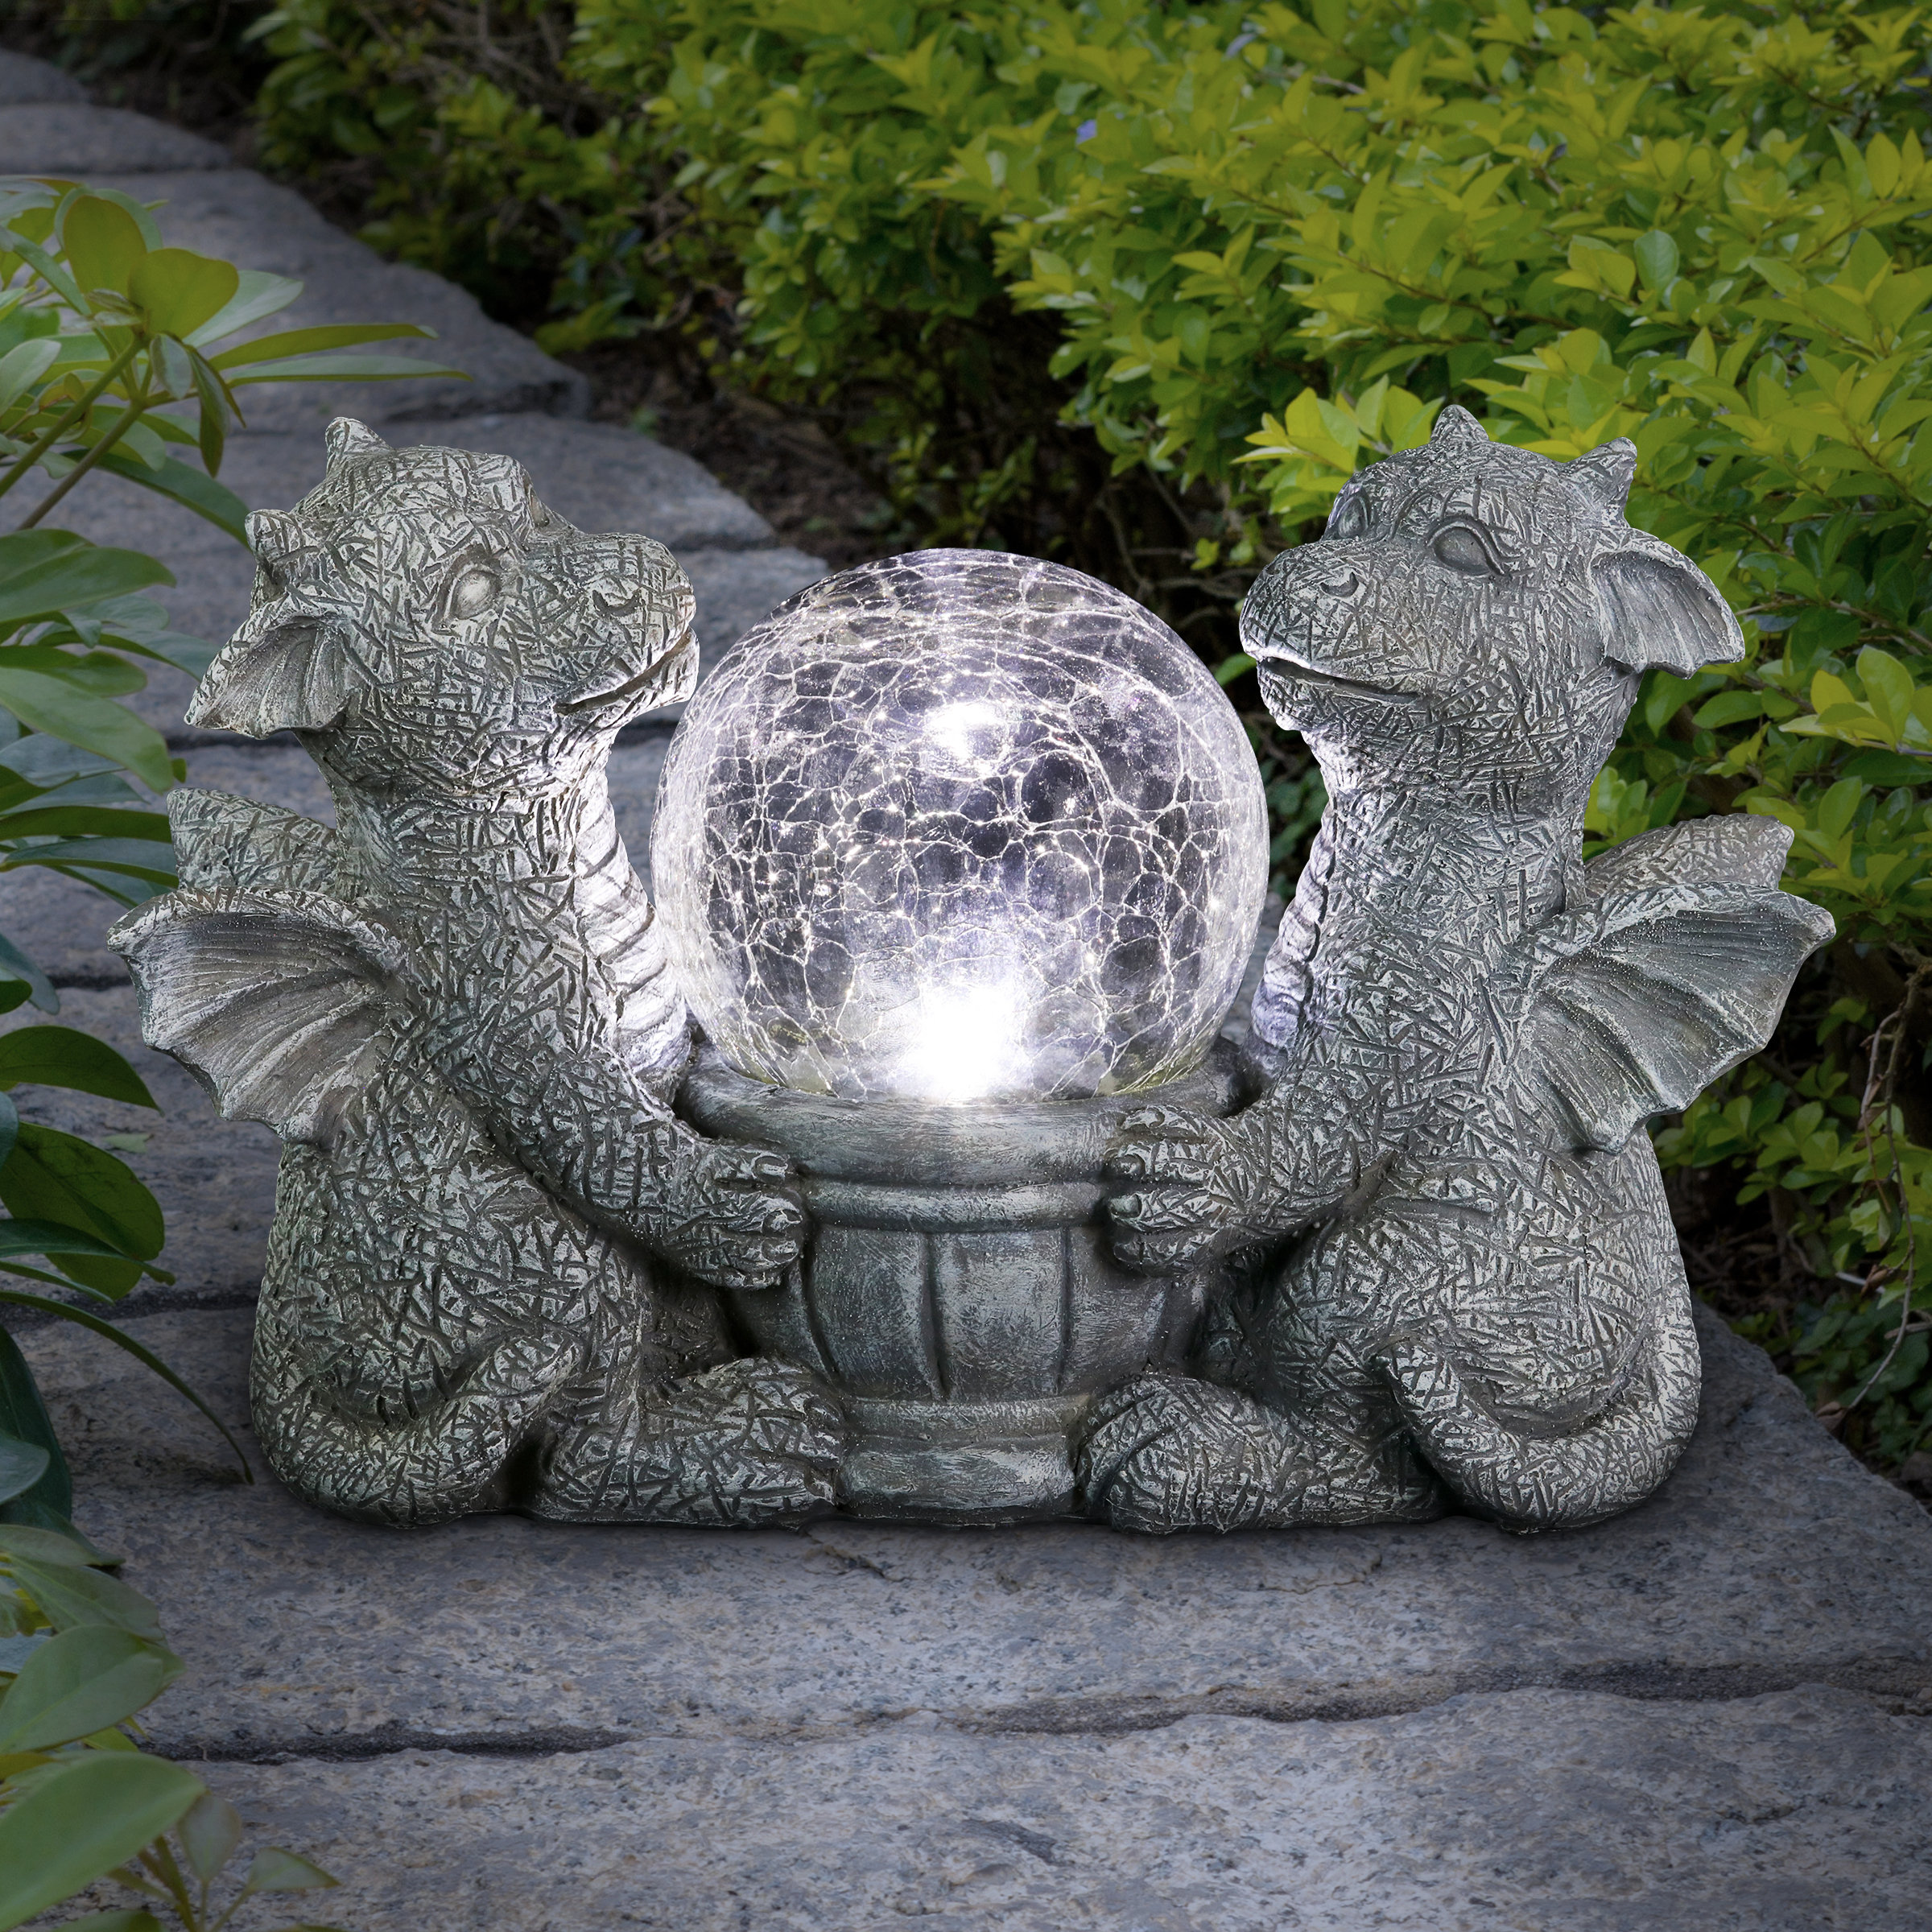 Exhart Solar Dragons Garden Statue with a Glass Crackle Ball, 11 by 7 Inches